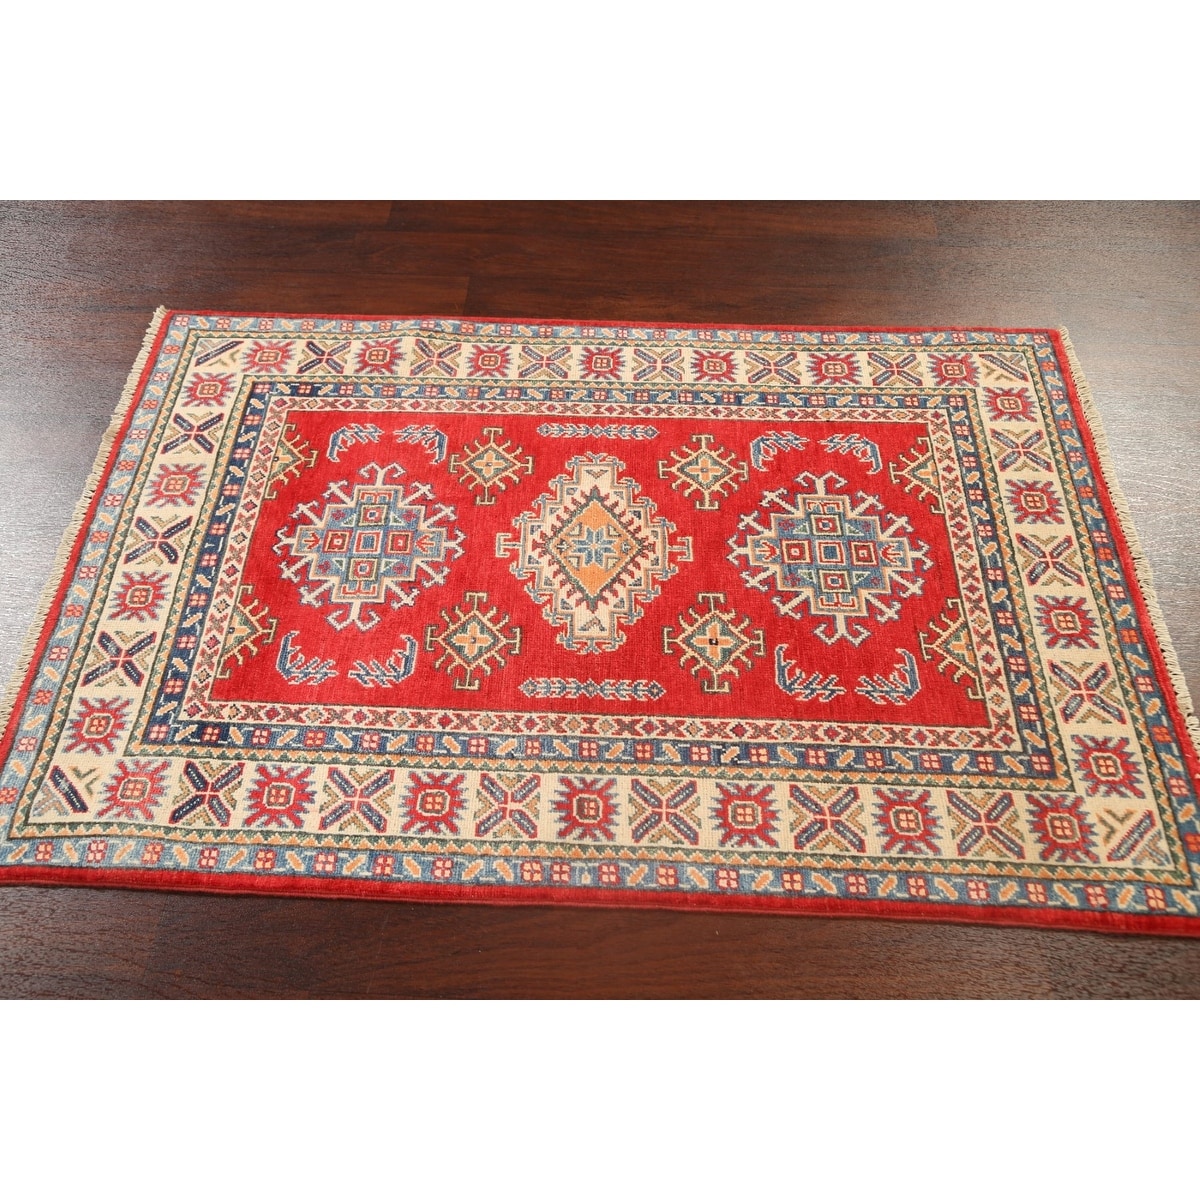 https://ak1.ostkcdn.com/images/products/is/images/direct/238ba9fcc60952522bcaae73de093315d0596104/Kazak-Traditional-Oriental-Area-Rug-Wool-Hand-knotted-Geometric-Carpet.jpg